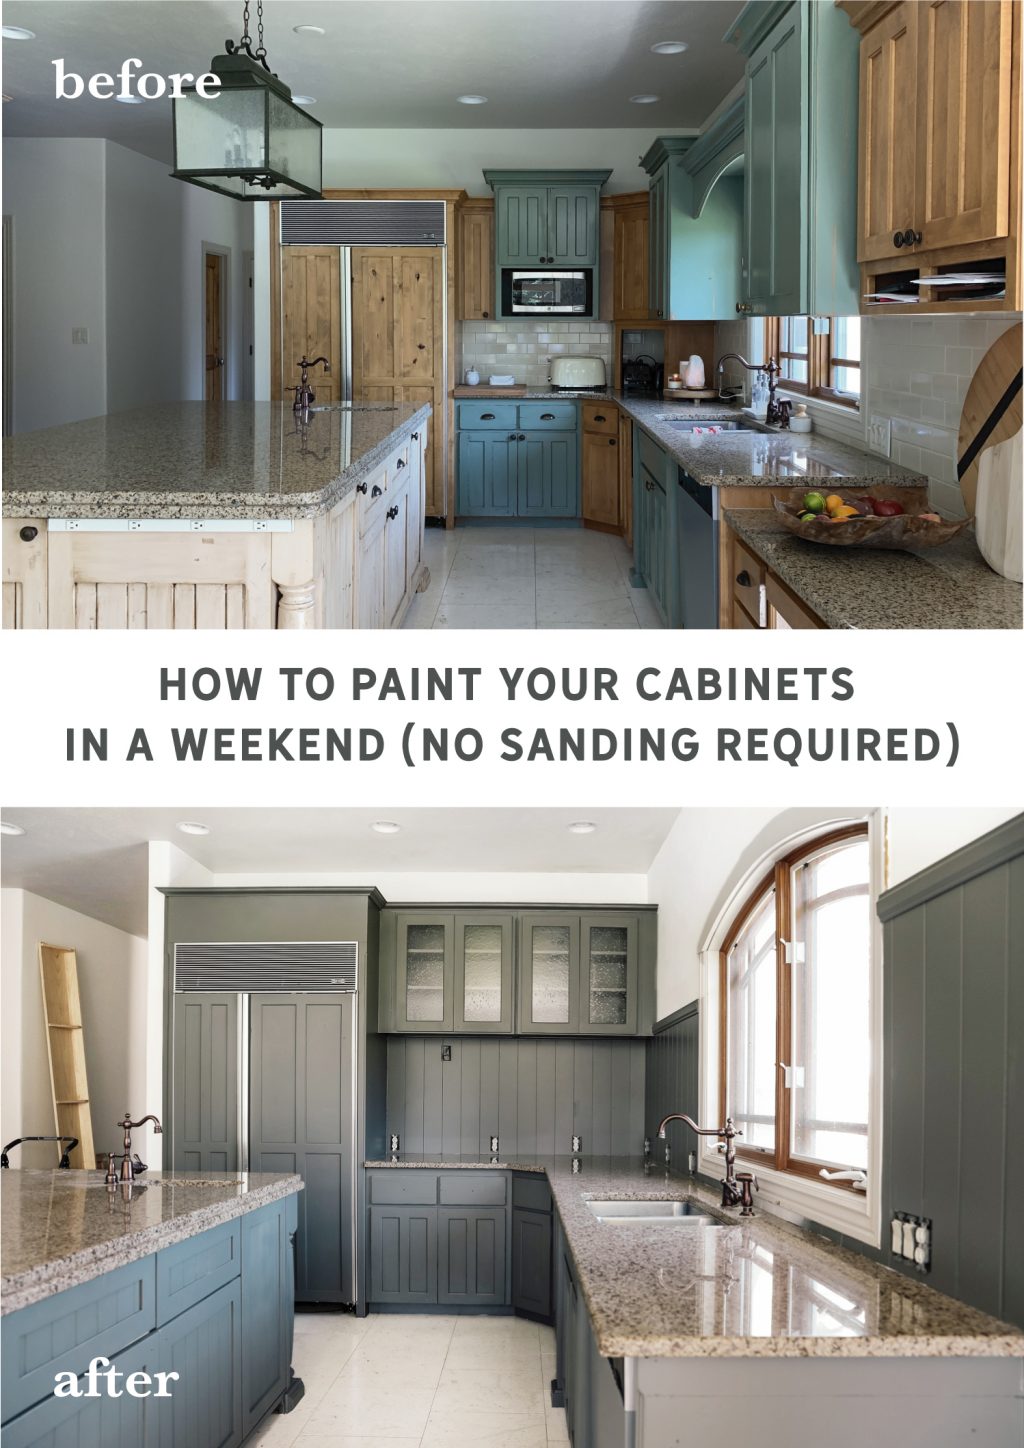 How To Paint Your Cabinets In A Weekend, Spray Paint Your Own Kitchen Cabinets